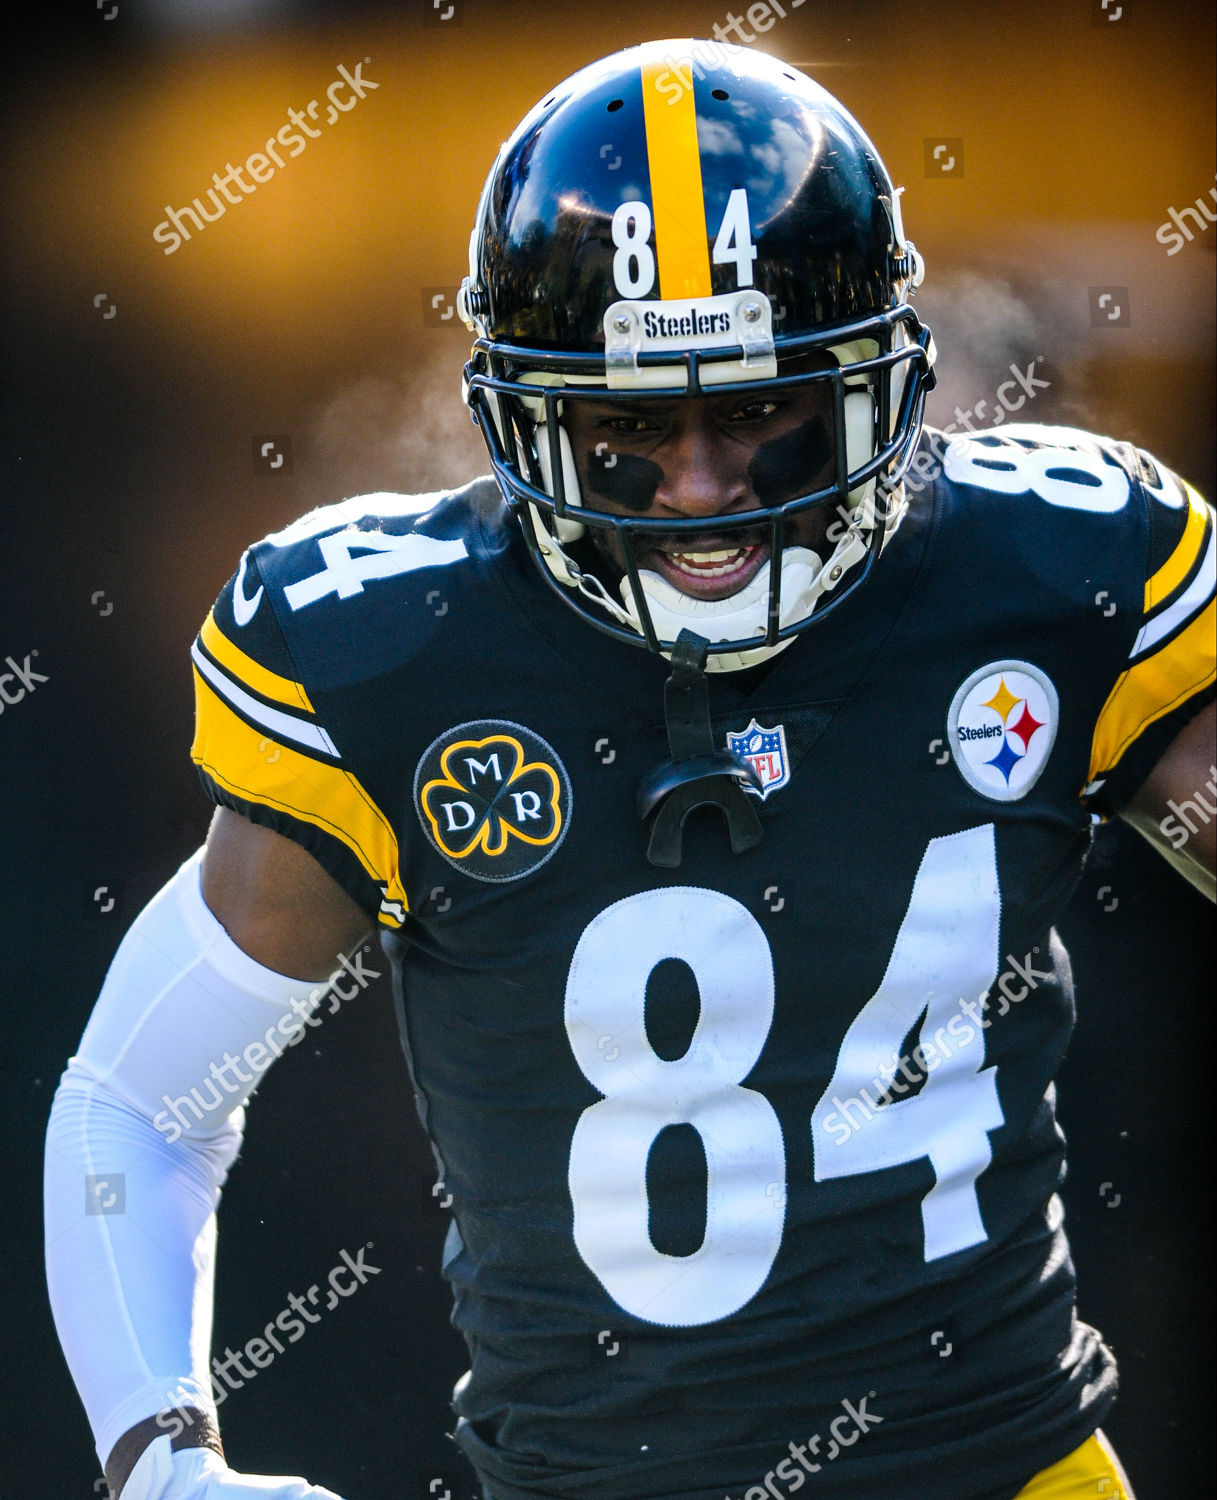 Th Steelers Antonio Brown 84 During Editorial Stock Photo - Stock Image